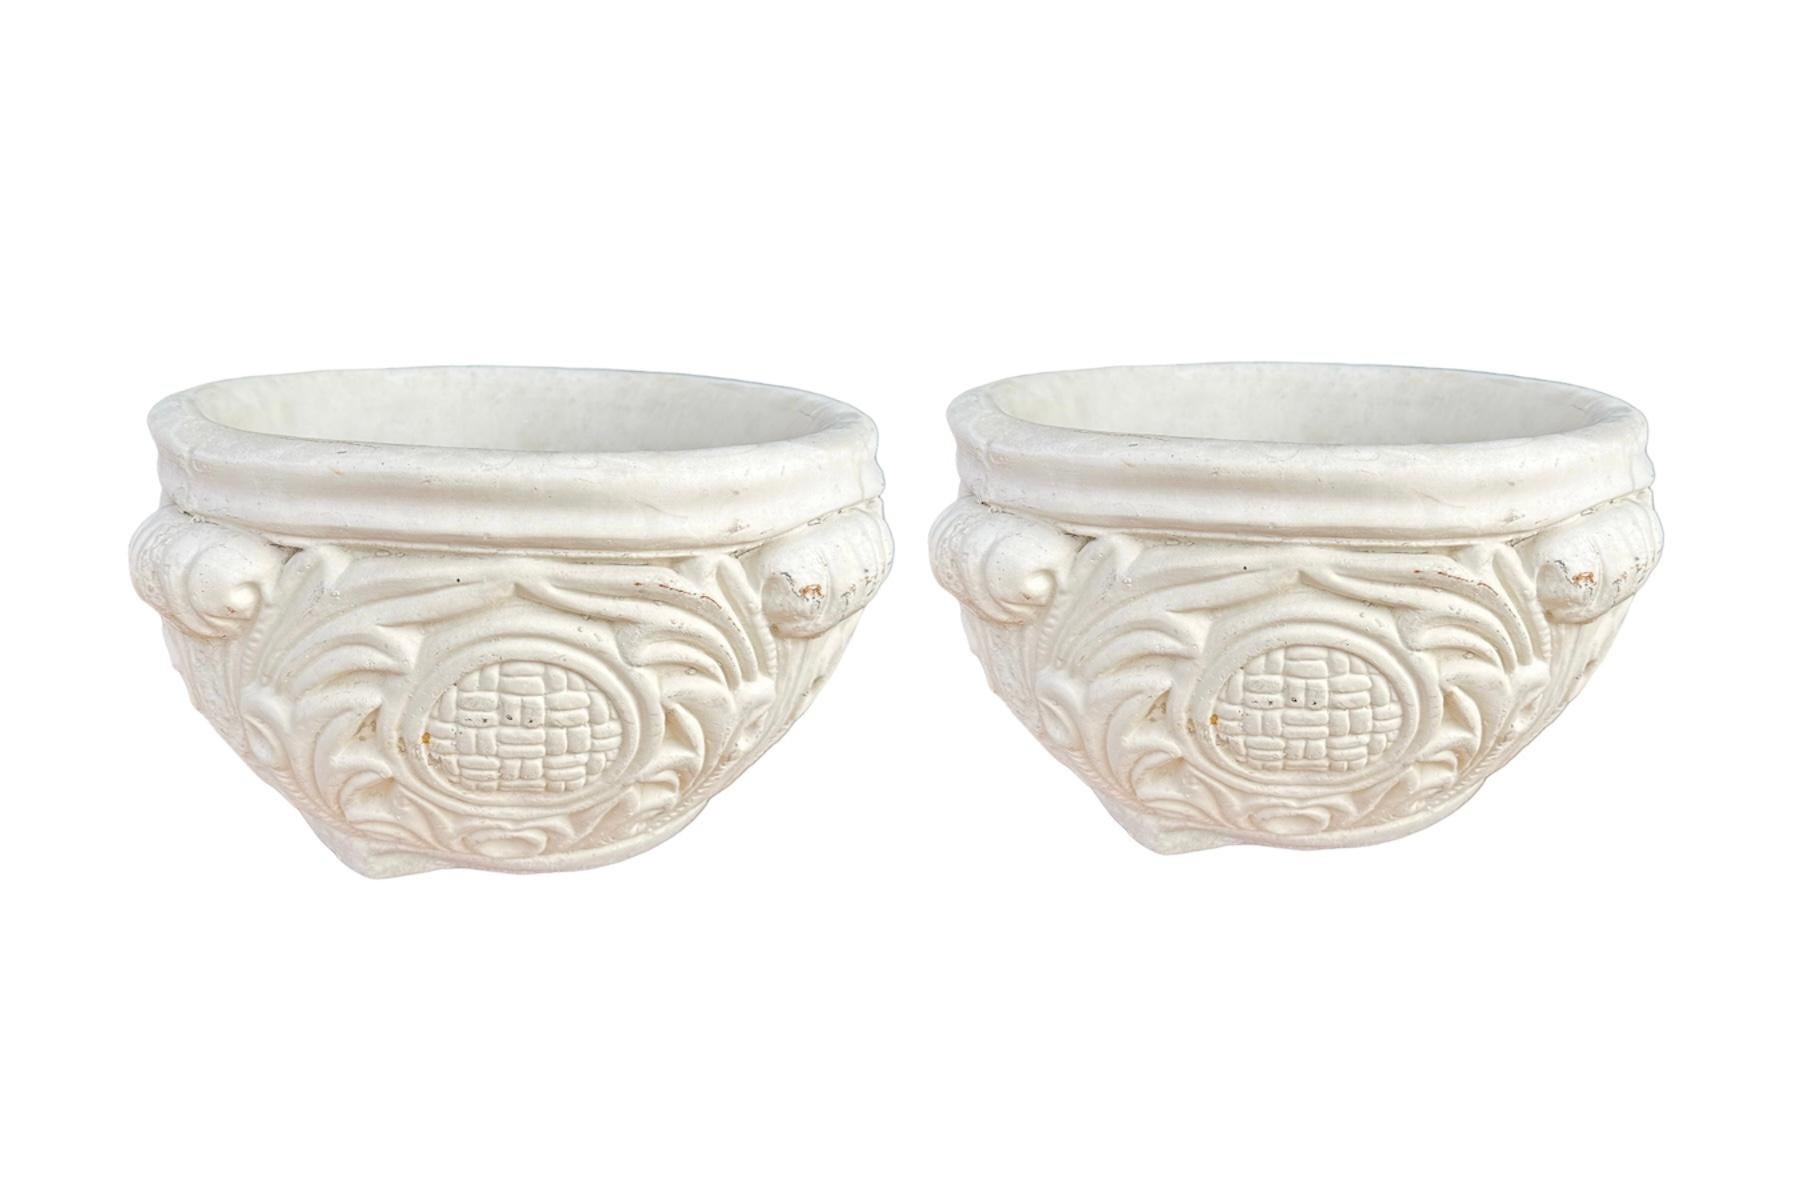 PAIR' of circa 1930s, vintage Asian inspired cast concrete Garden ( Heavy) planters with four scroll handles and leaves which surround a central medallion with a basket weave pattern on all four panels. Have been out of the harsh elements for over